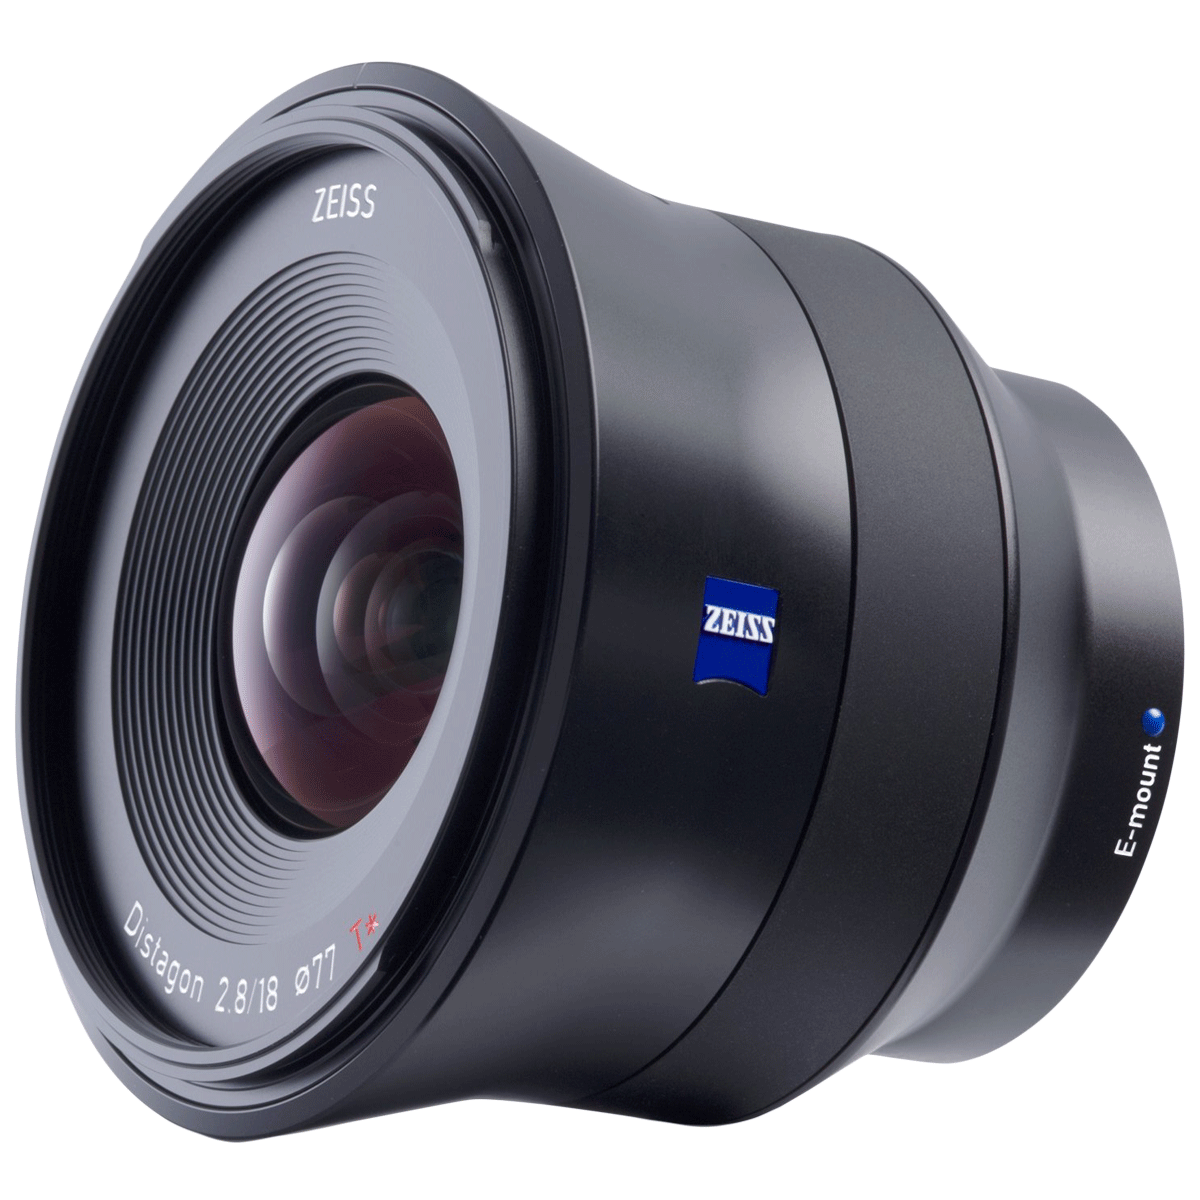 Carl Zeiss Batis 18 mm f/2.8 – f/22 Wide Angle Lens for Sony E-Mount Mirrorless and Full Frame Cameras (Weather and Dust Sealing, 000000-2136-691, Black)_1